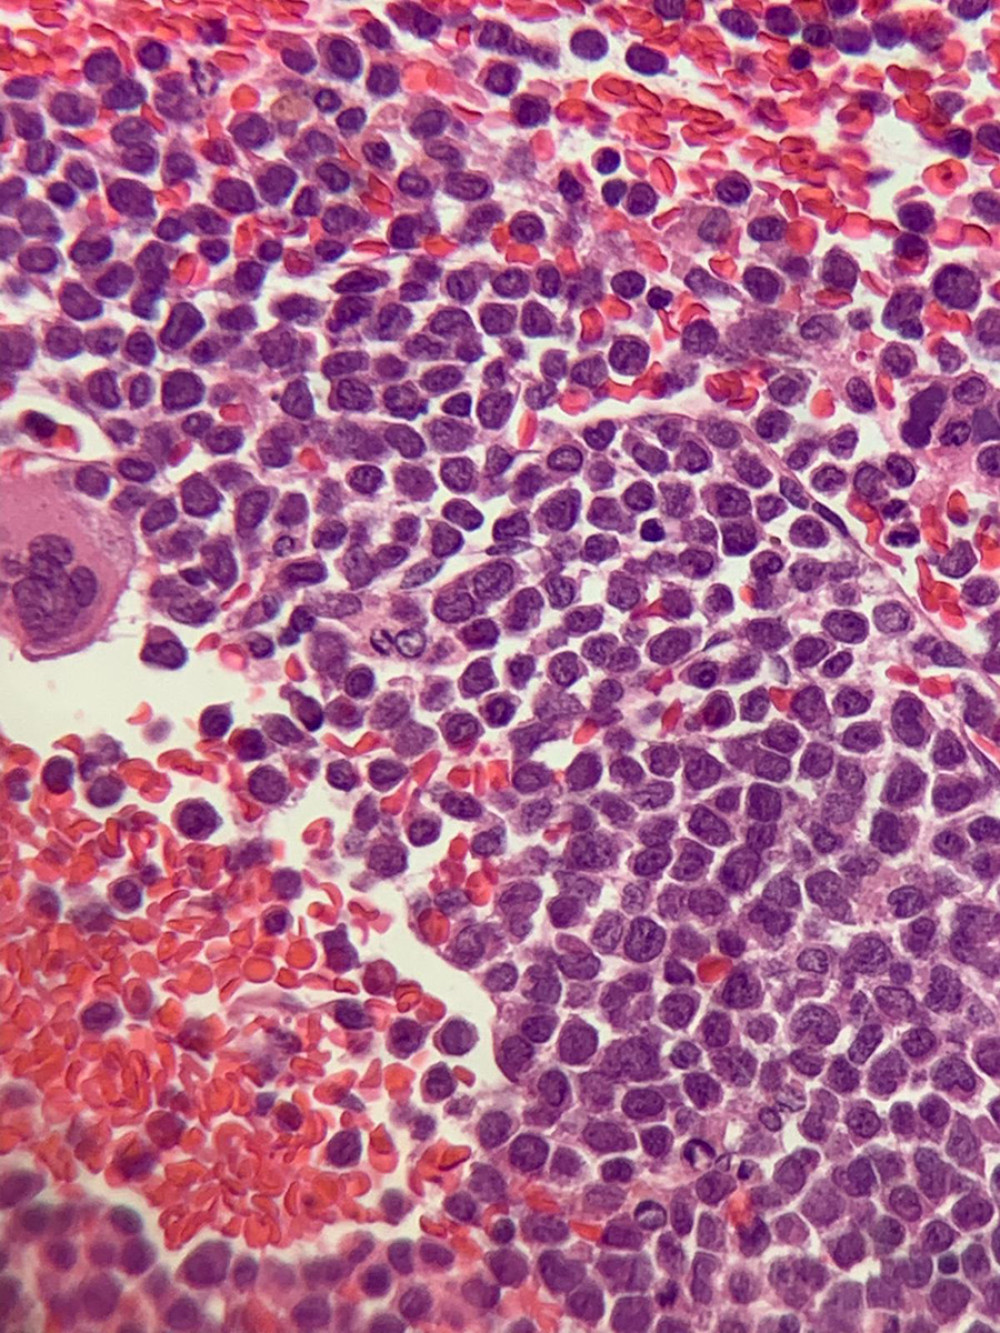 Bone marrow biopsy showing hypercellular bone marrow with a large number of monoblasts, and no auer rods seen.